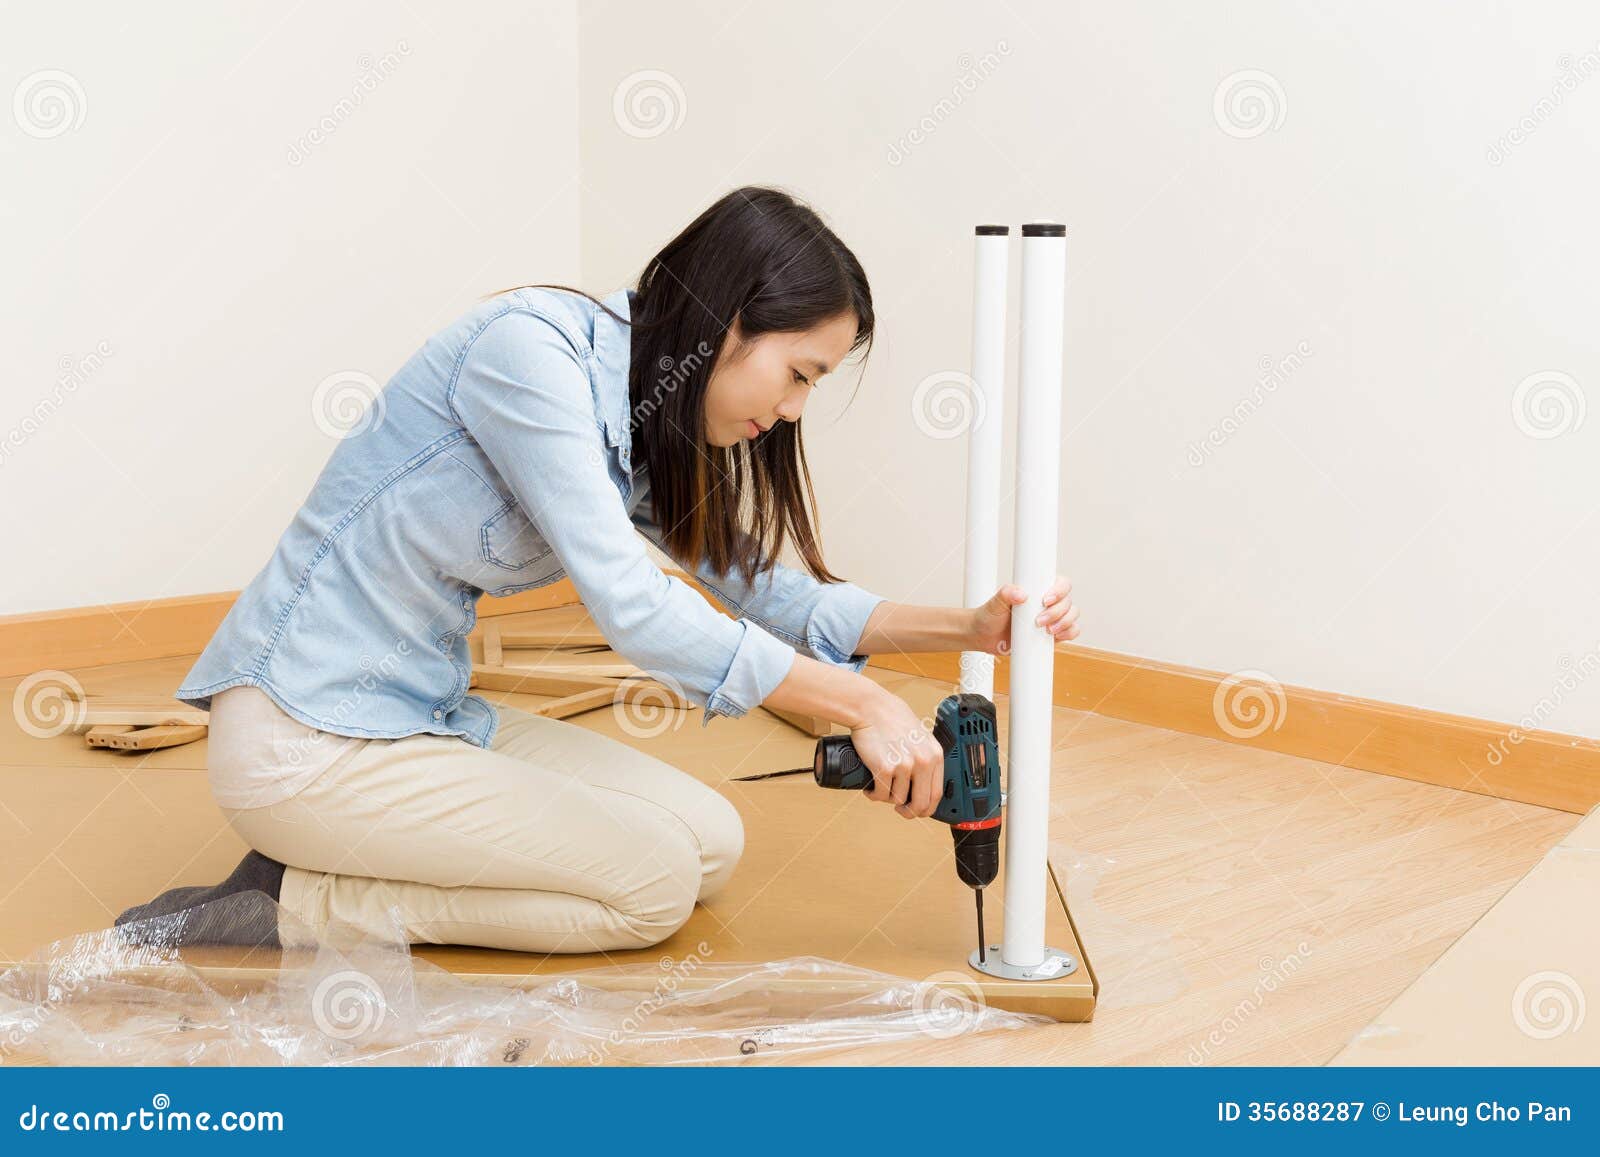 asian woman using strew driver for assembling furniture